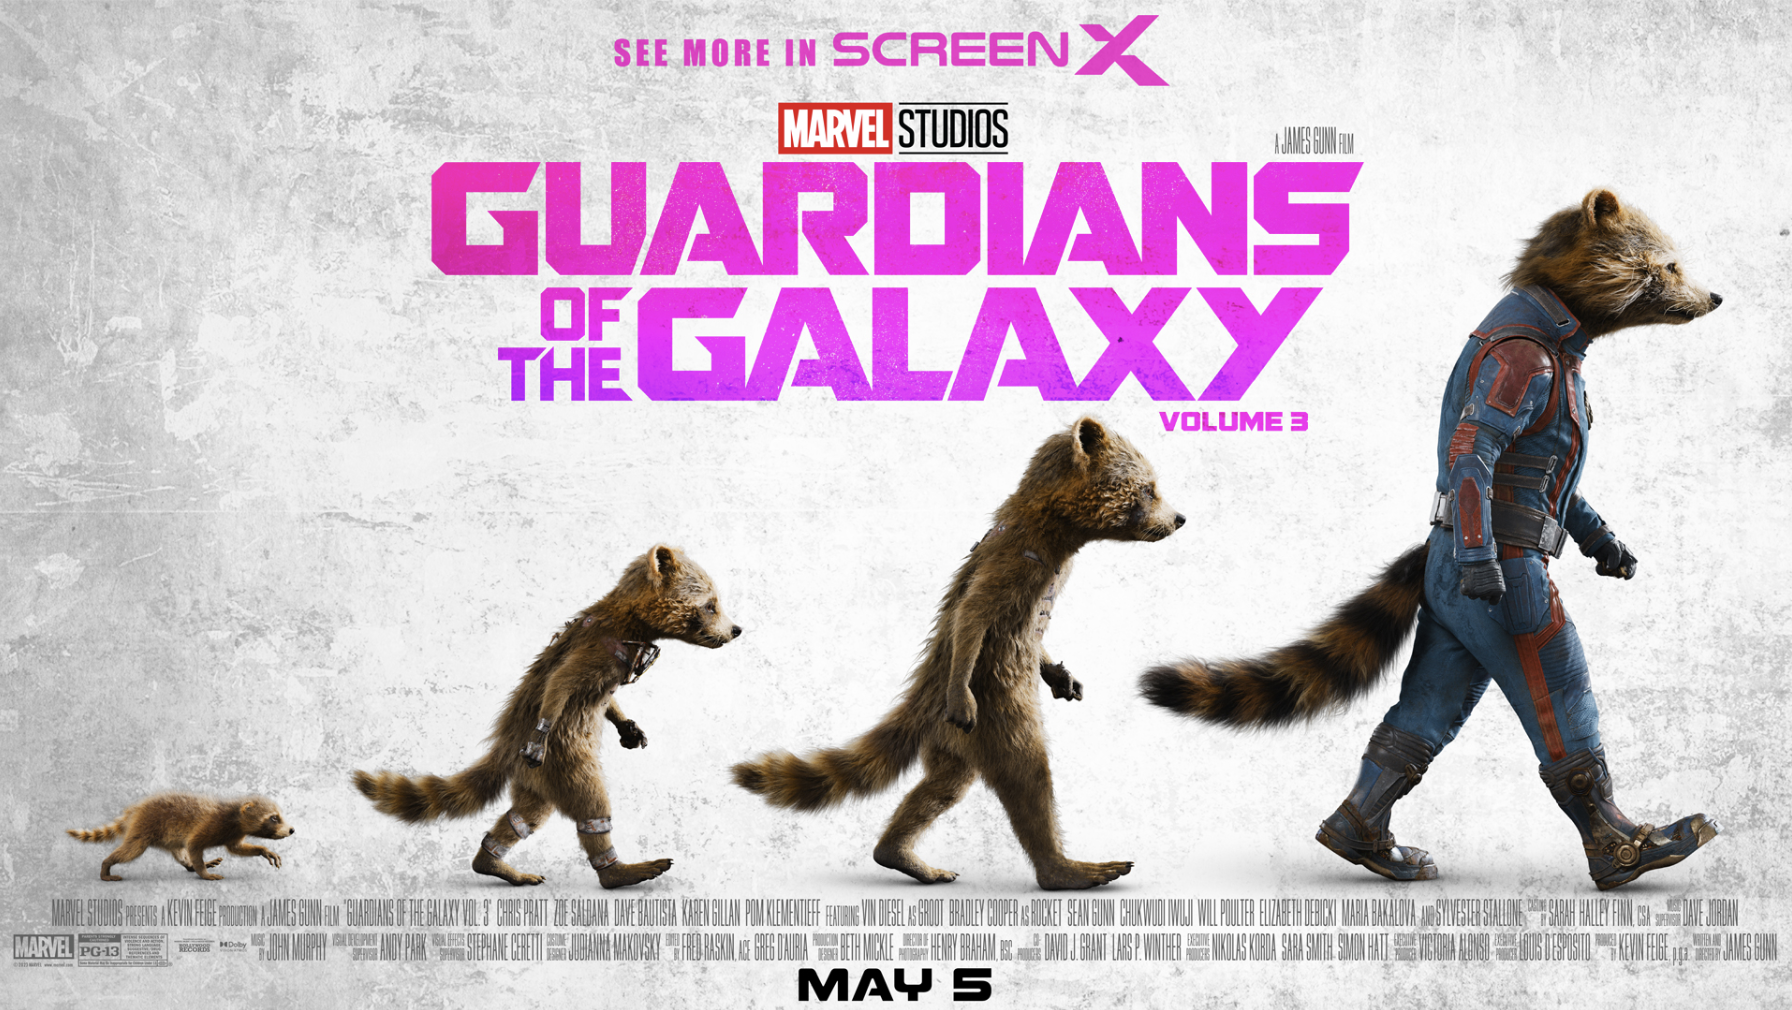 https://allears.net/wp-content/uploads/2023/04/guardians-of-the-galaxy-vol-3-image.png